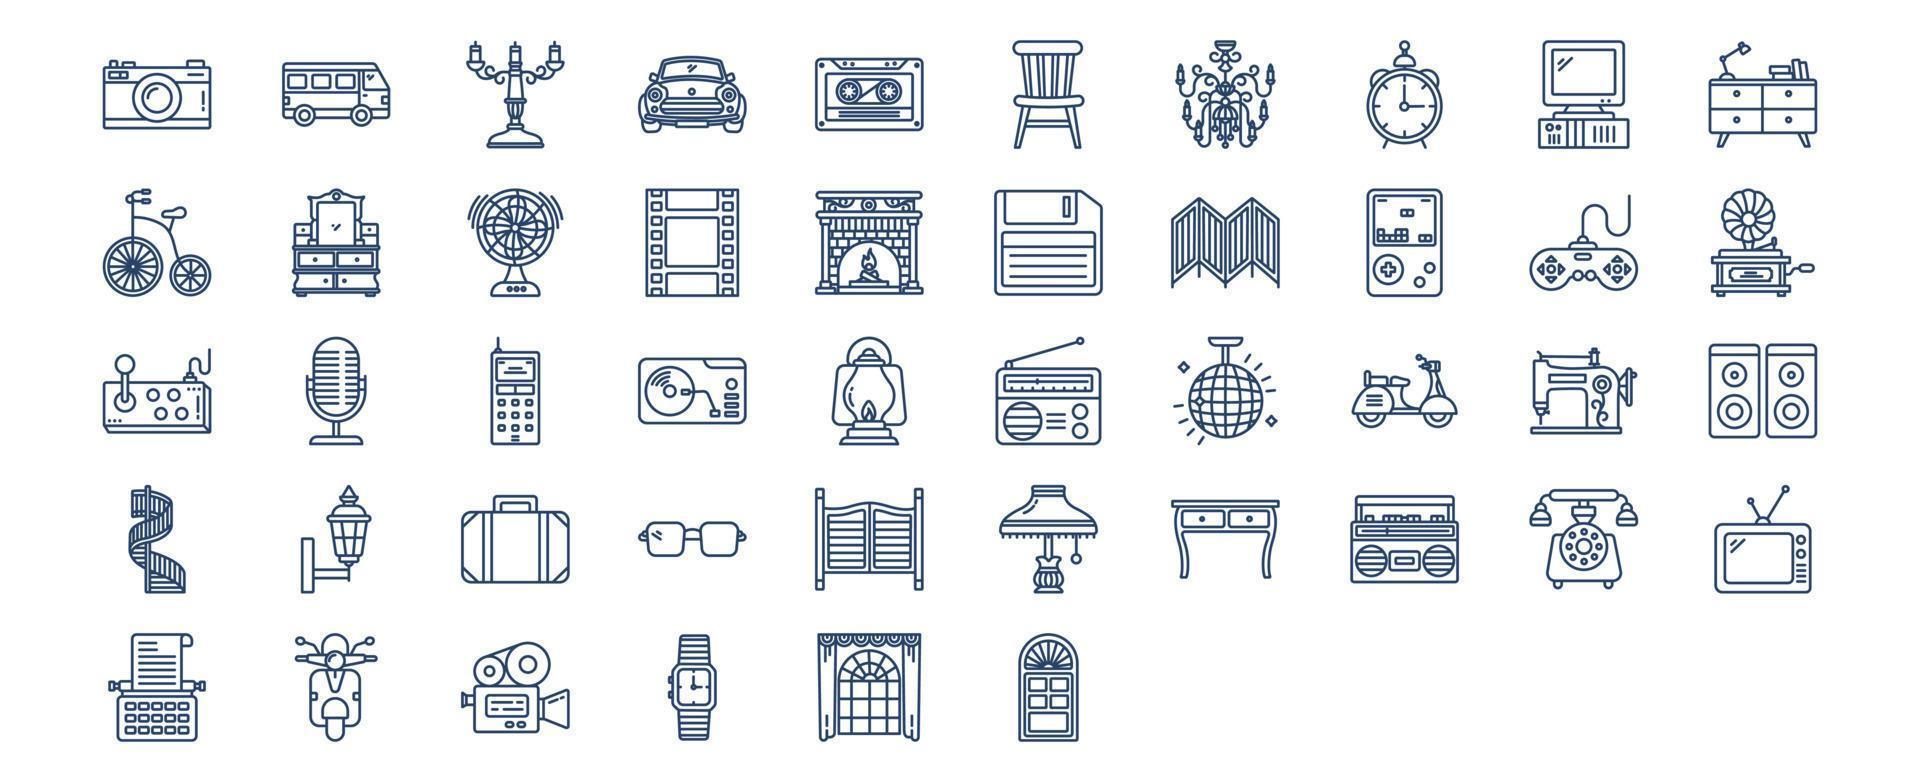 Collection of icons related to Retro style 80c objects, including icons like Camara, Camper van, Car, Clock and more. vector illustrations, Pixel Perfect set